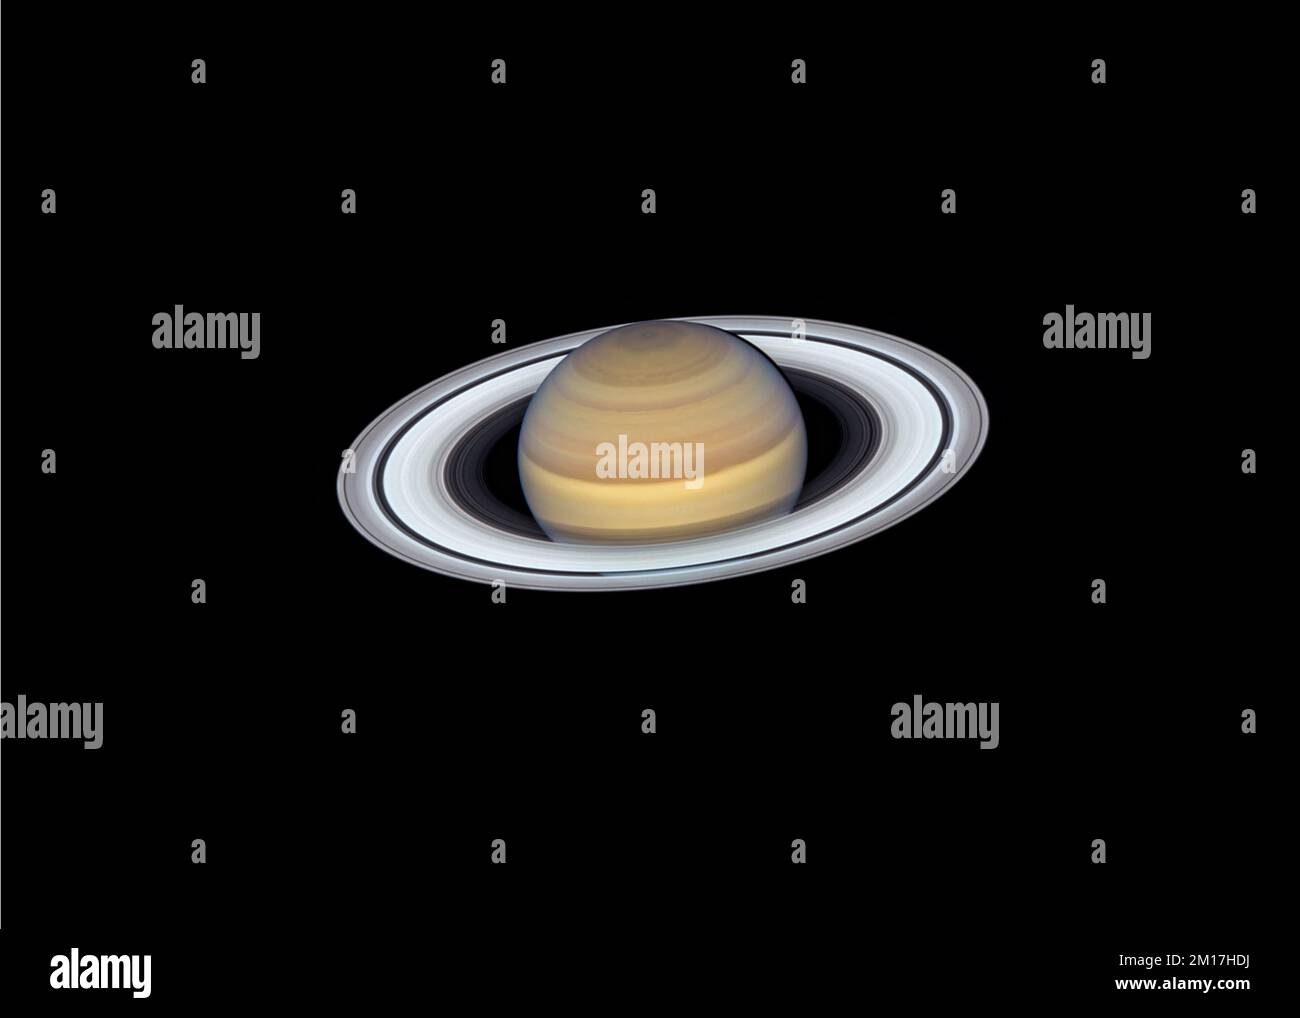 The planet Saturn viewed through a telescope with it's rings clearly seen. Digitally enhanced. Elements of this image furnished by NASA. Stock Photo